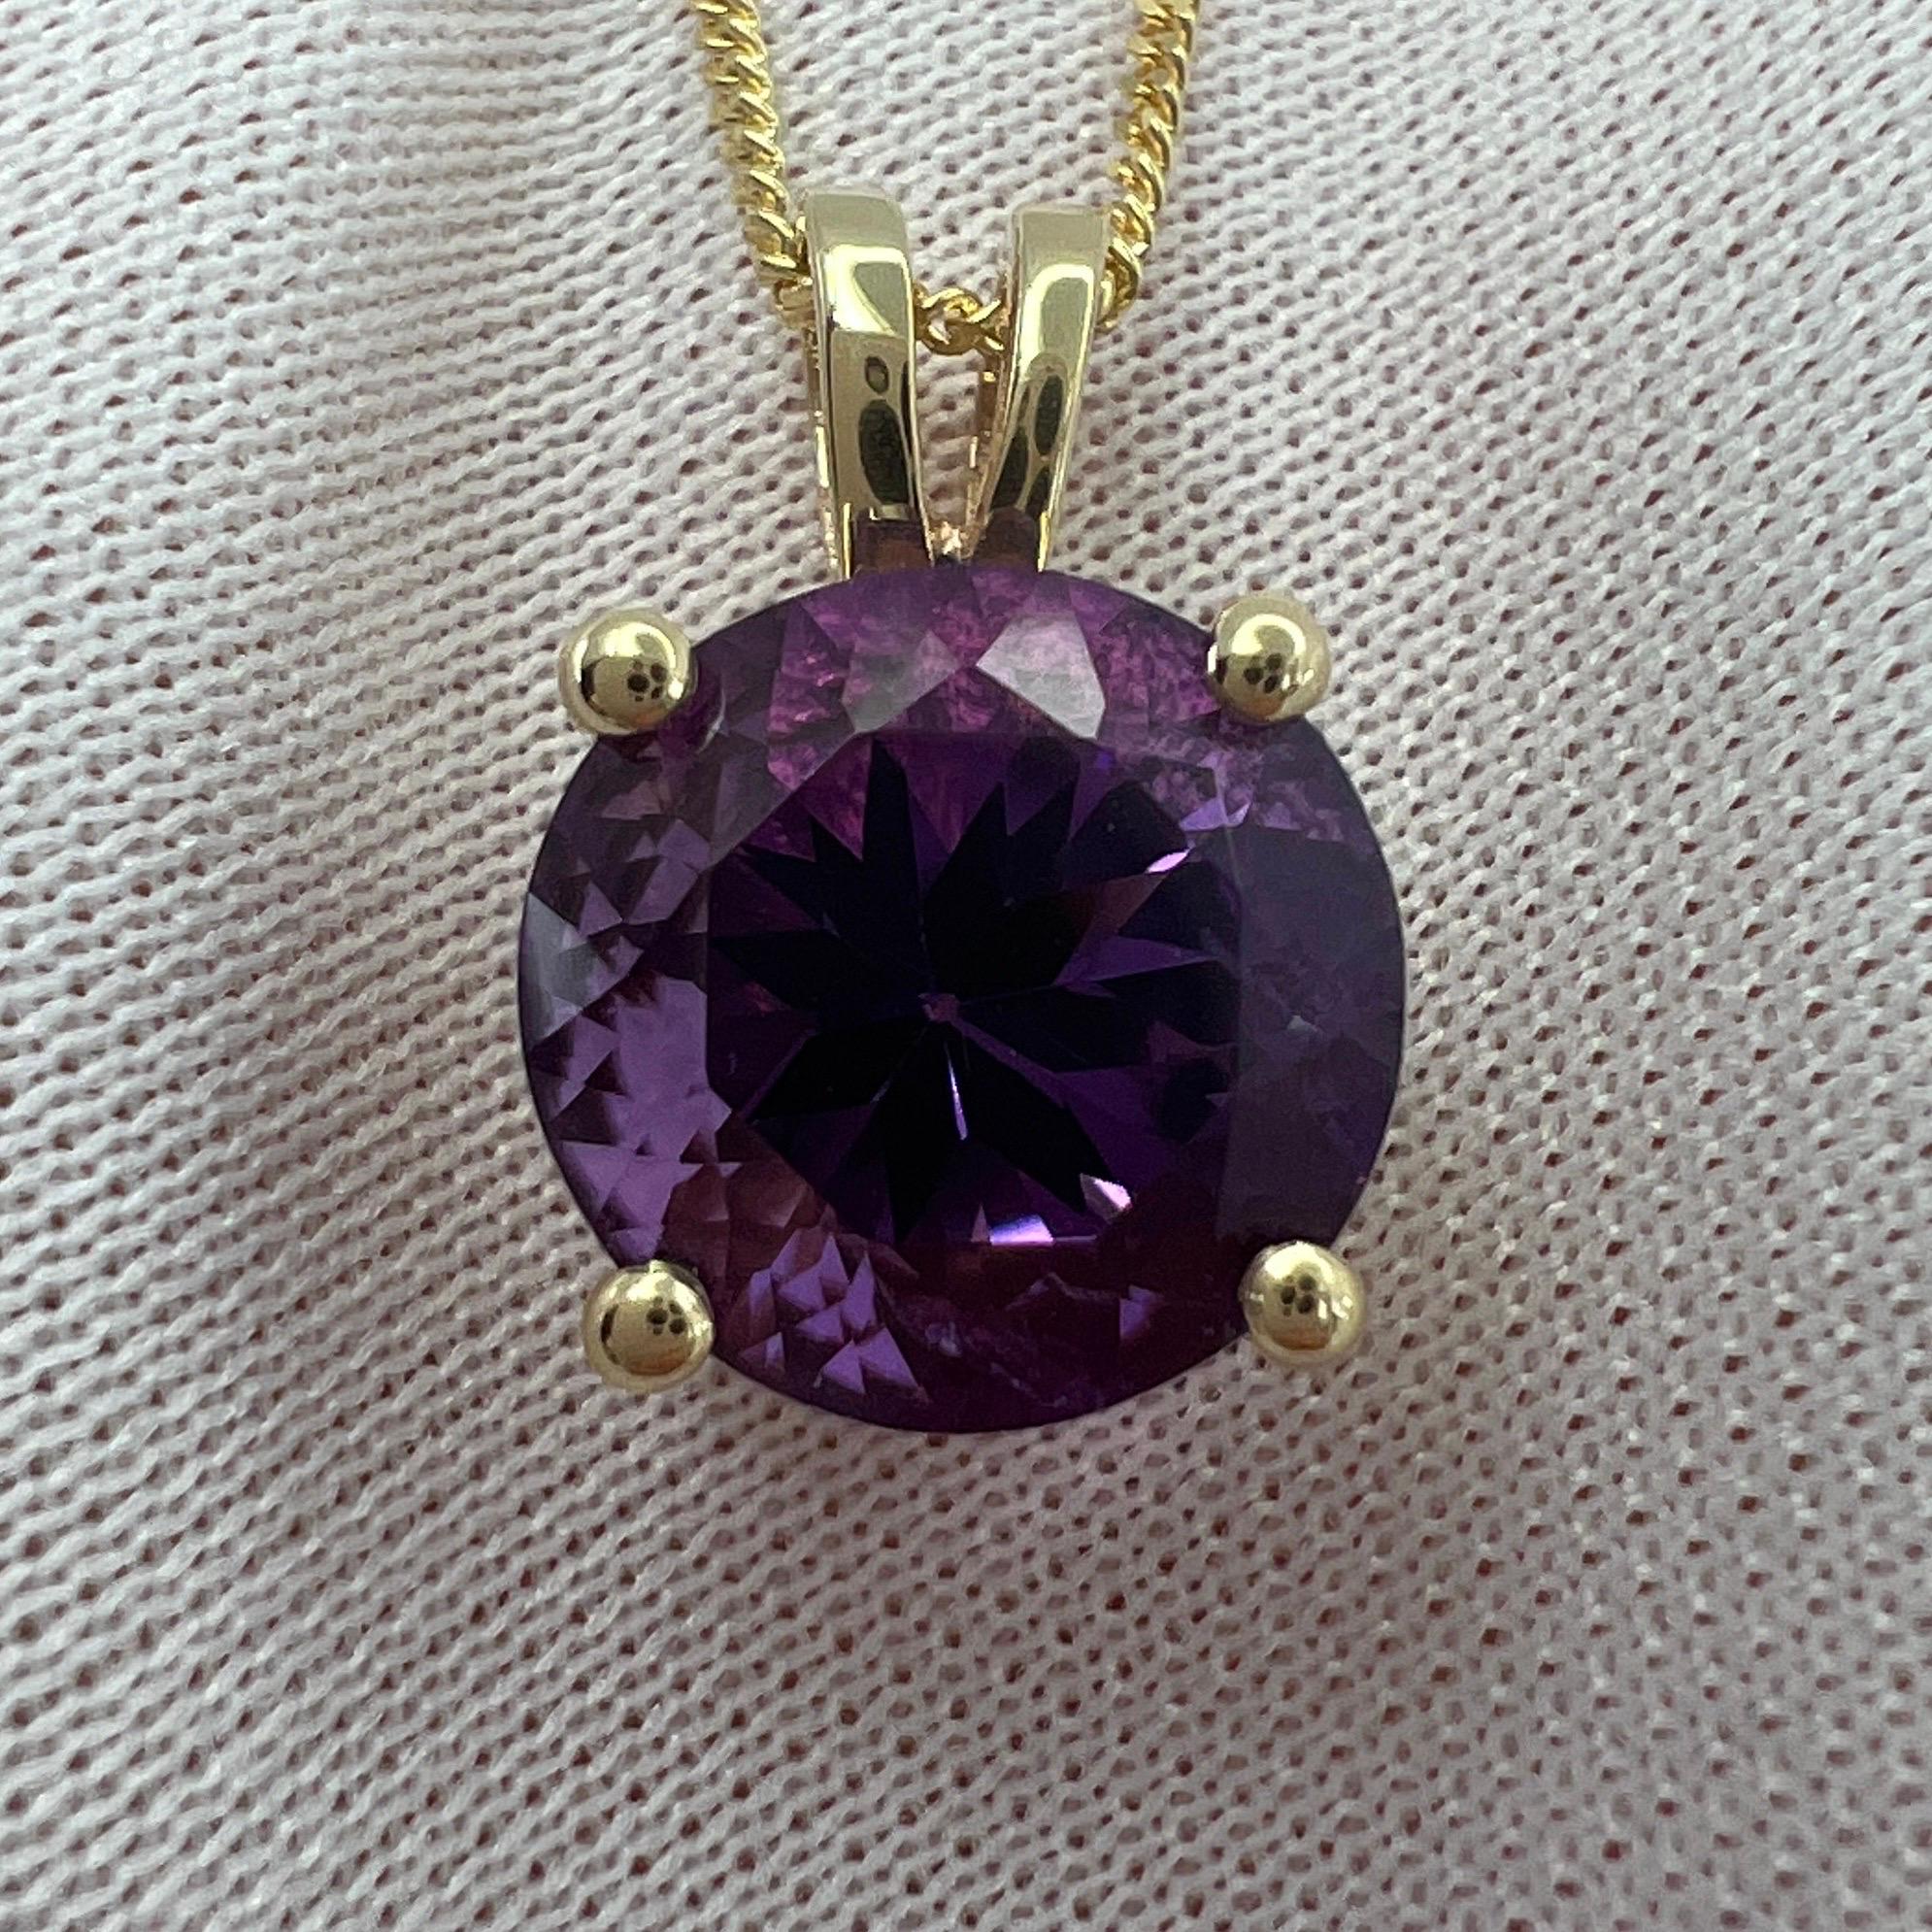 Vivid Purple Amethyst Round Brilliant Cut Yellow Gold Pendant Necklace.

Beautiful natural 3.32 carat amethyst set in a fine 9k yellow gold solitaire pendant.

This stone has an excellent round brilliant cut and excellent clarity. Fine amethyst